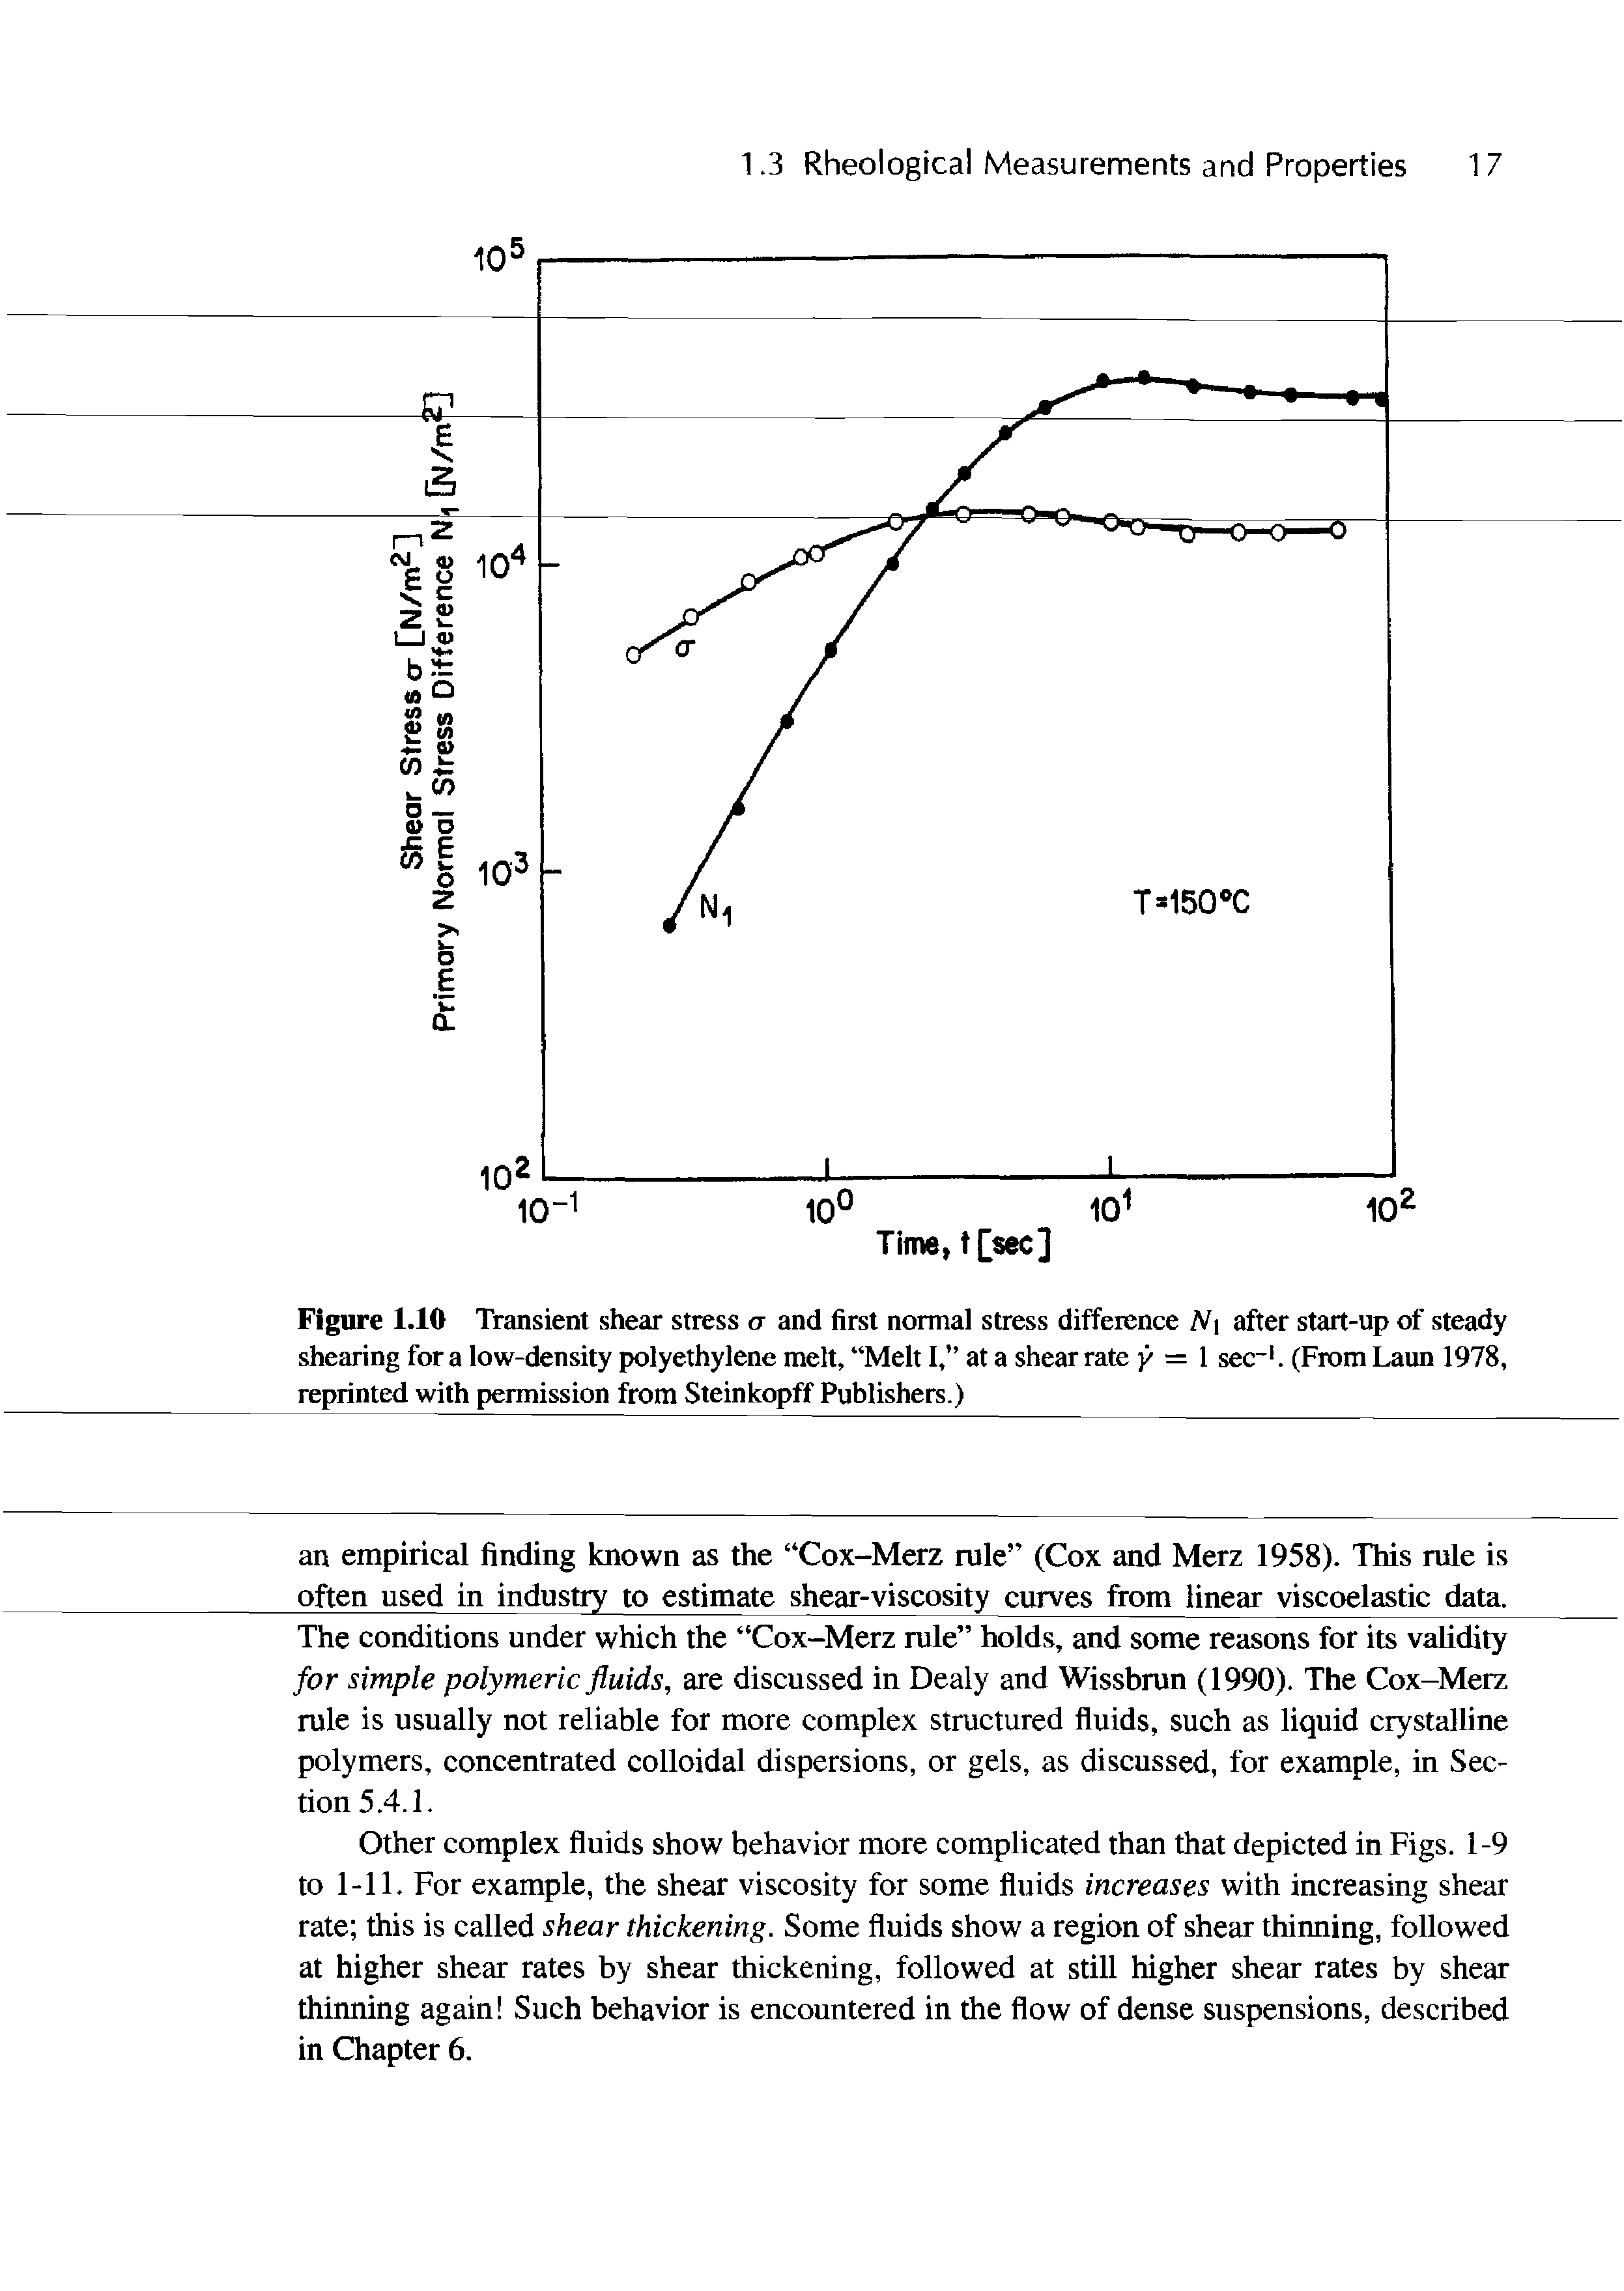 Figure 1.10 Transient shear stress a and first normal stress difference A i after start-up of steady shearing for a low-density polyethylene melt, Melt I, at a shear rate y = 1 sec . (From Laun 1978, reprinted with permission from Steinkopff Publishers.)...